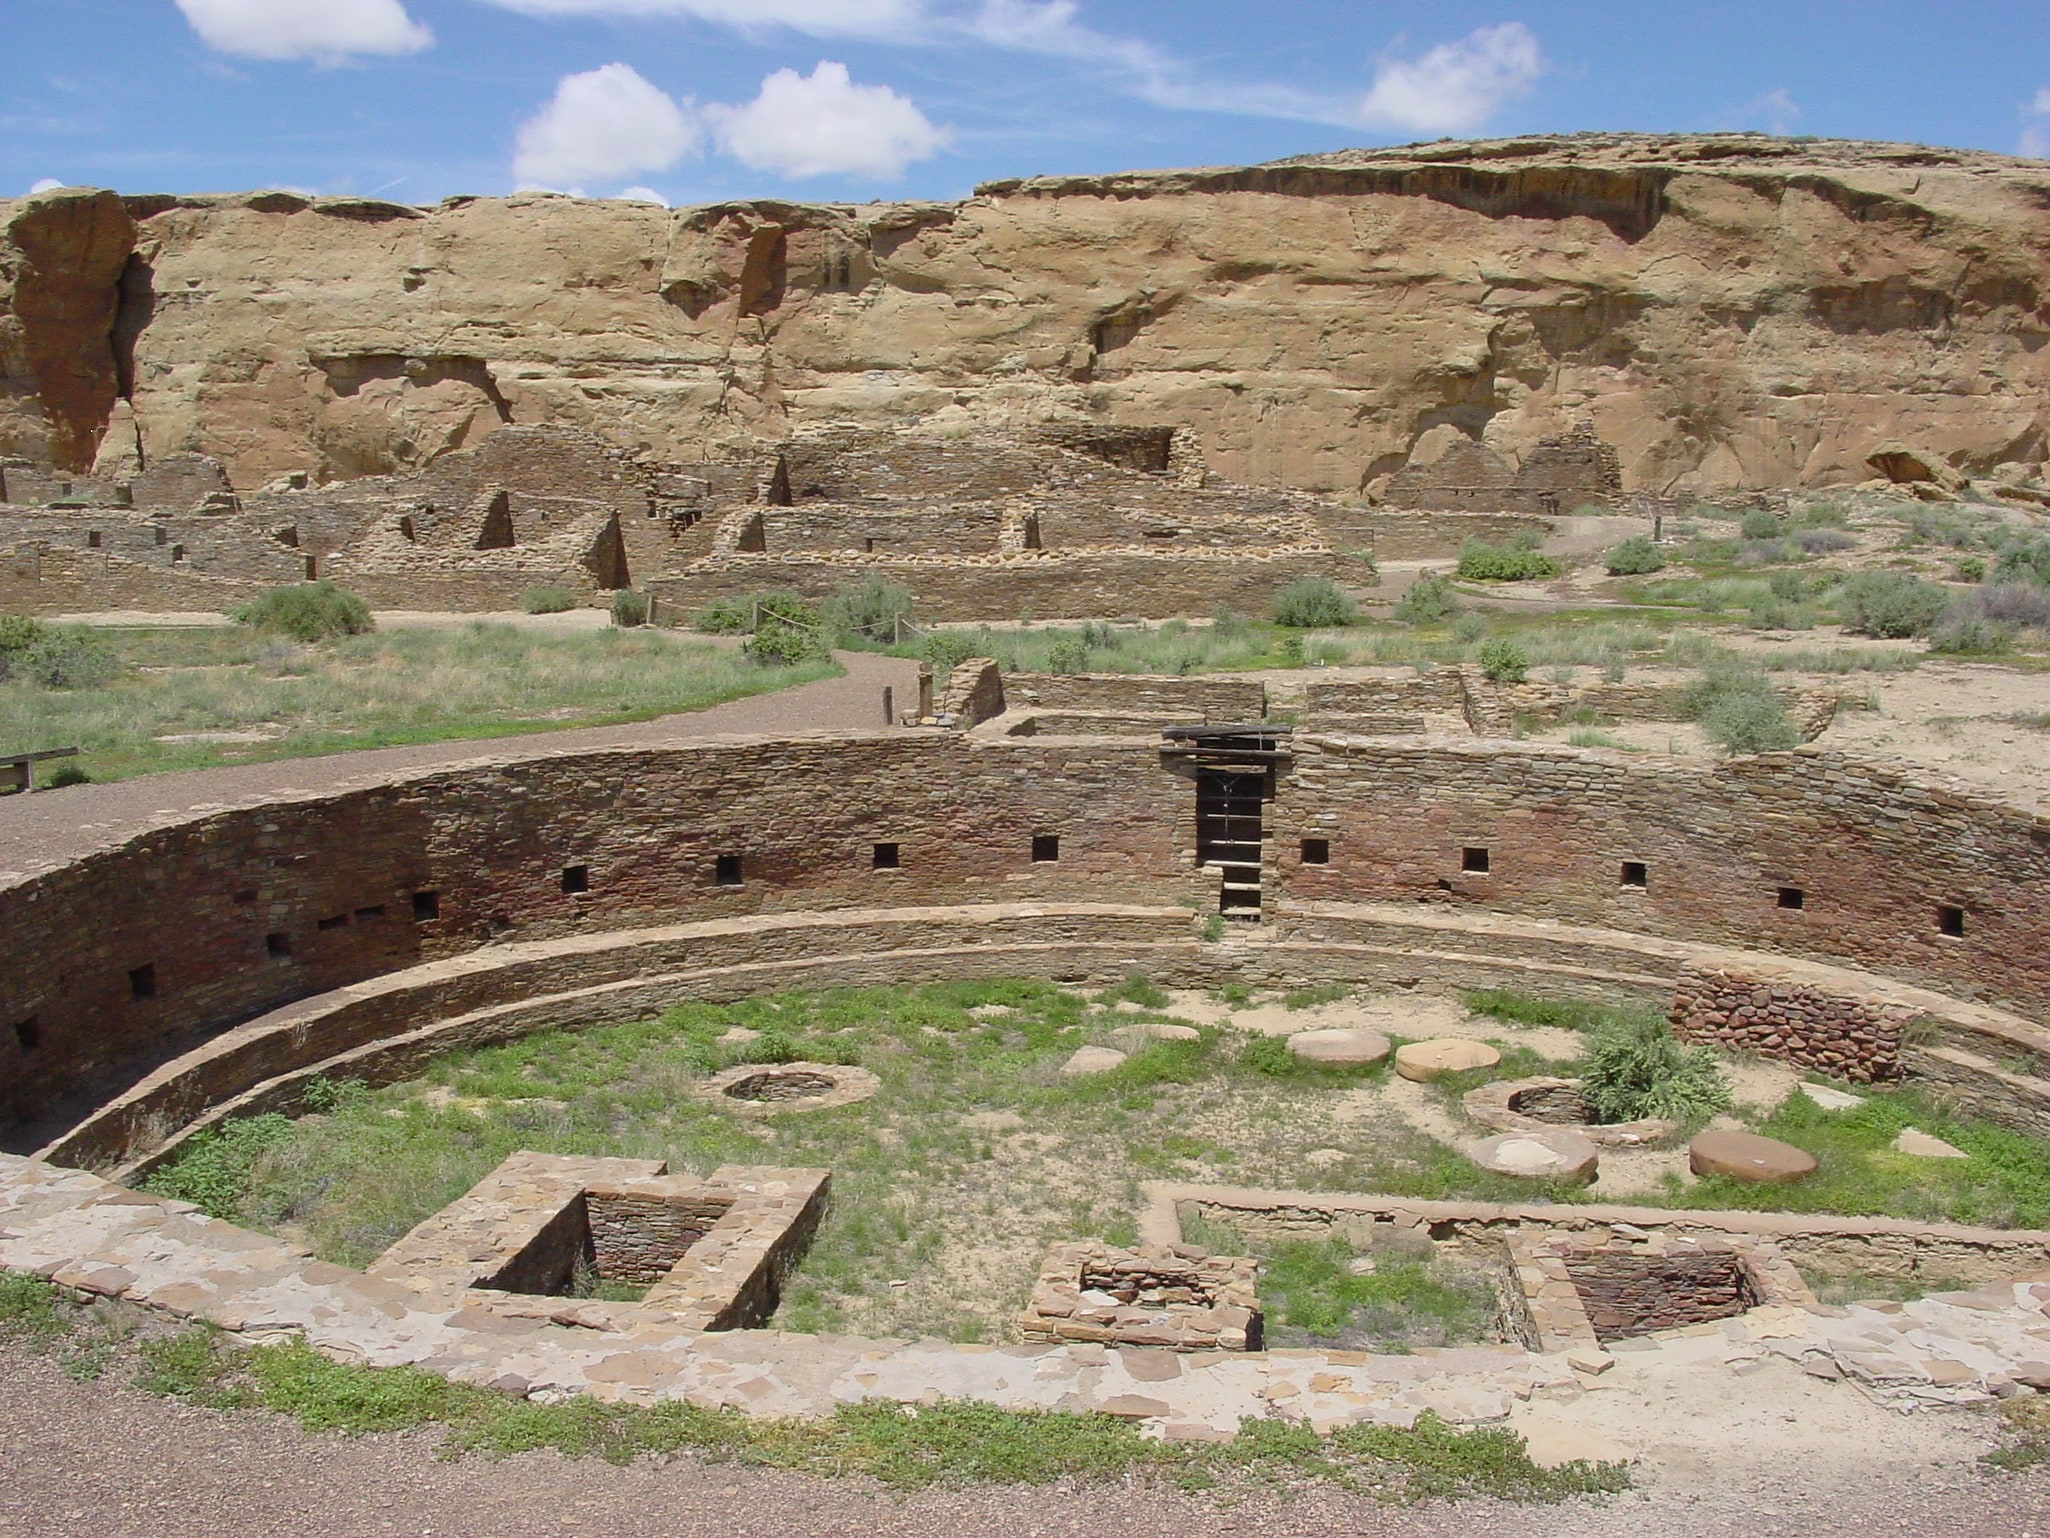 Chaco Culture National Historical Park, United States